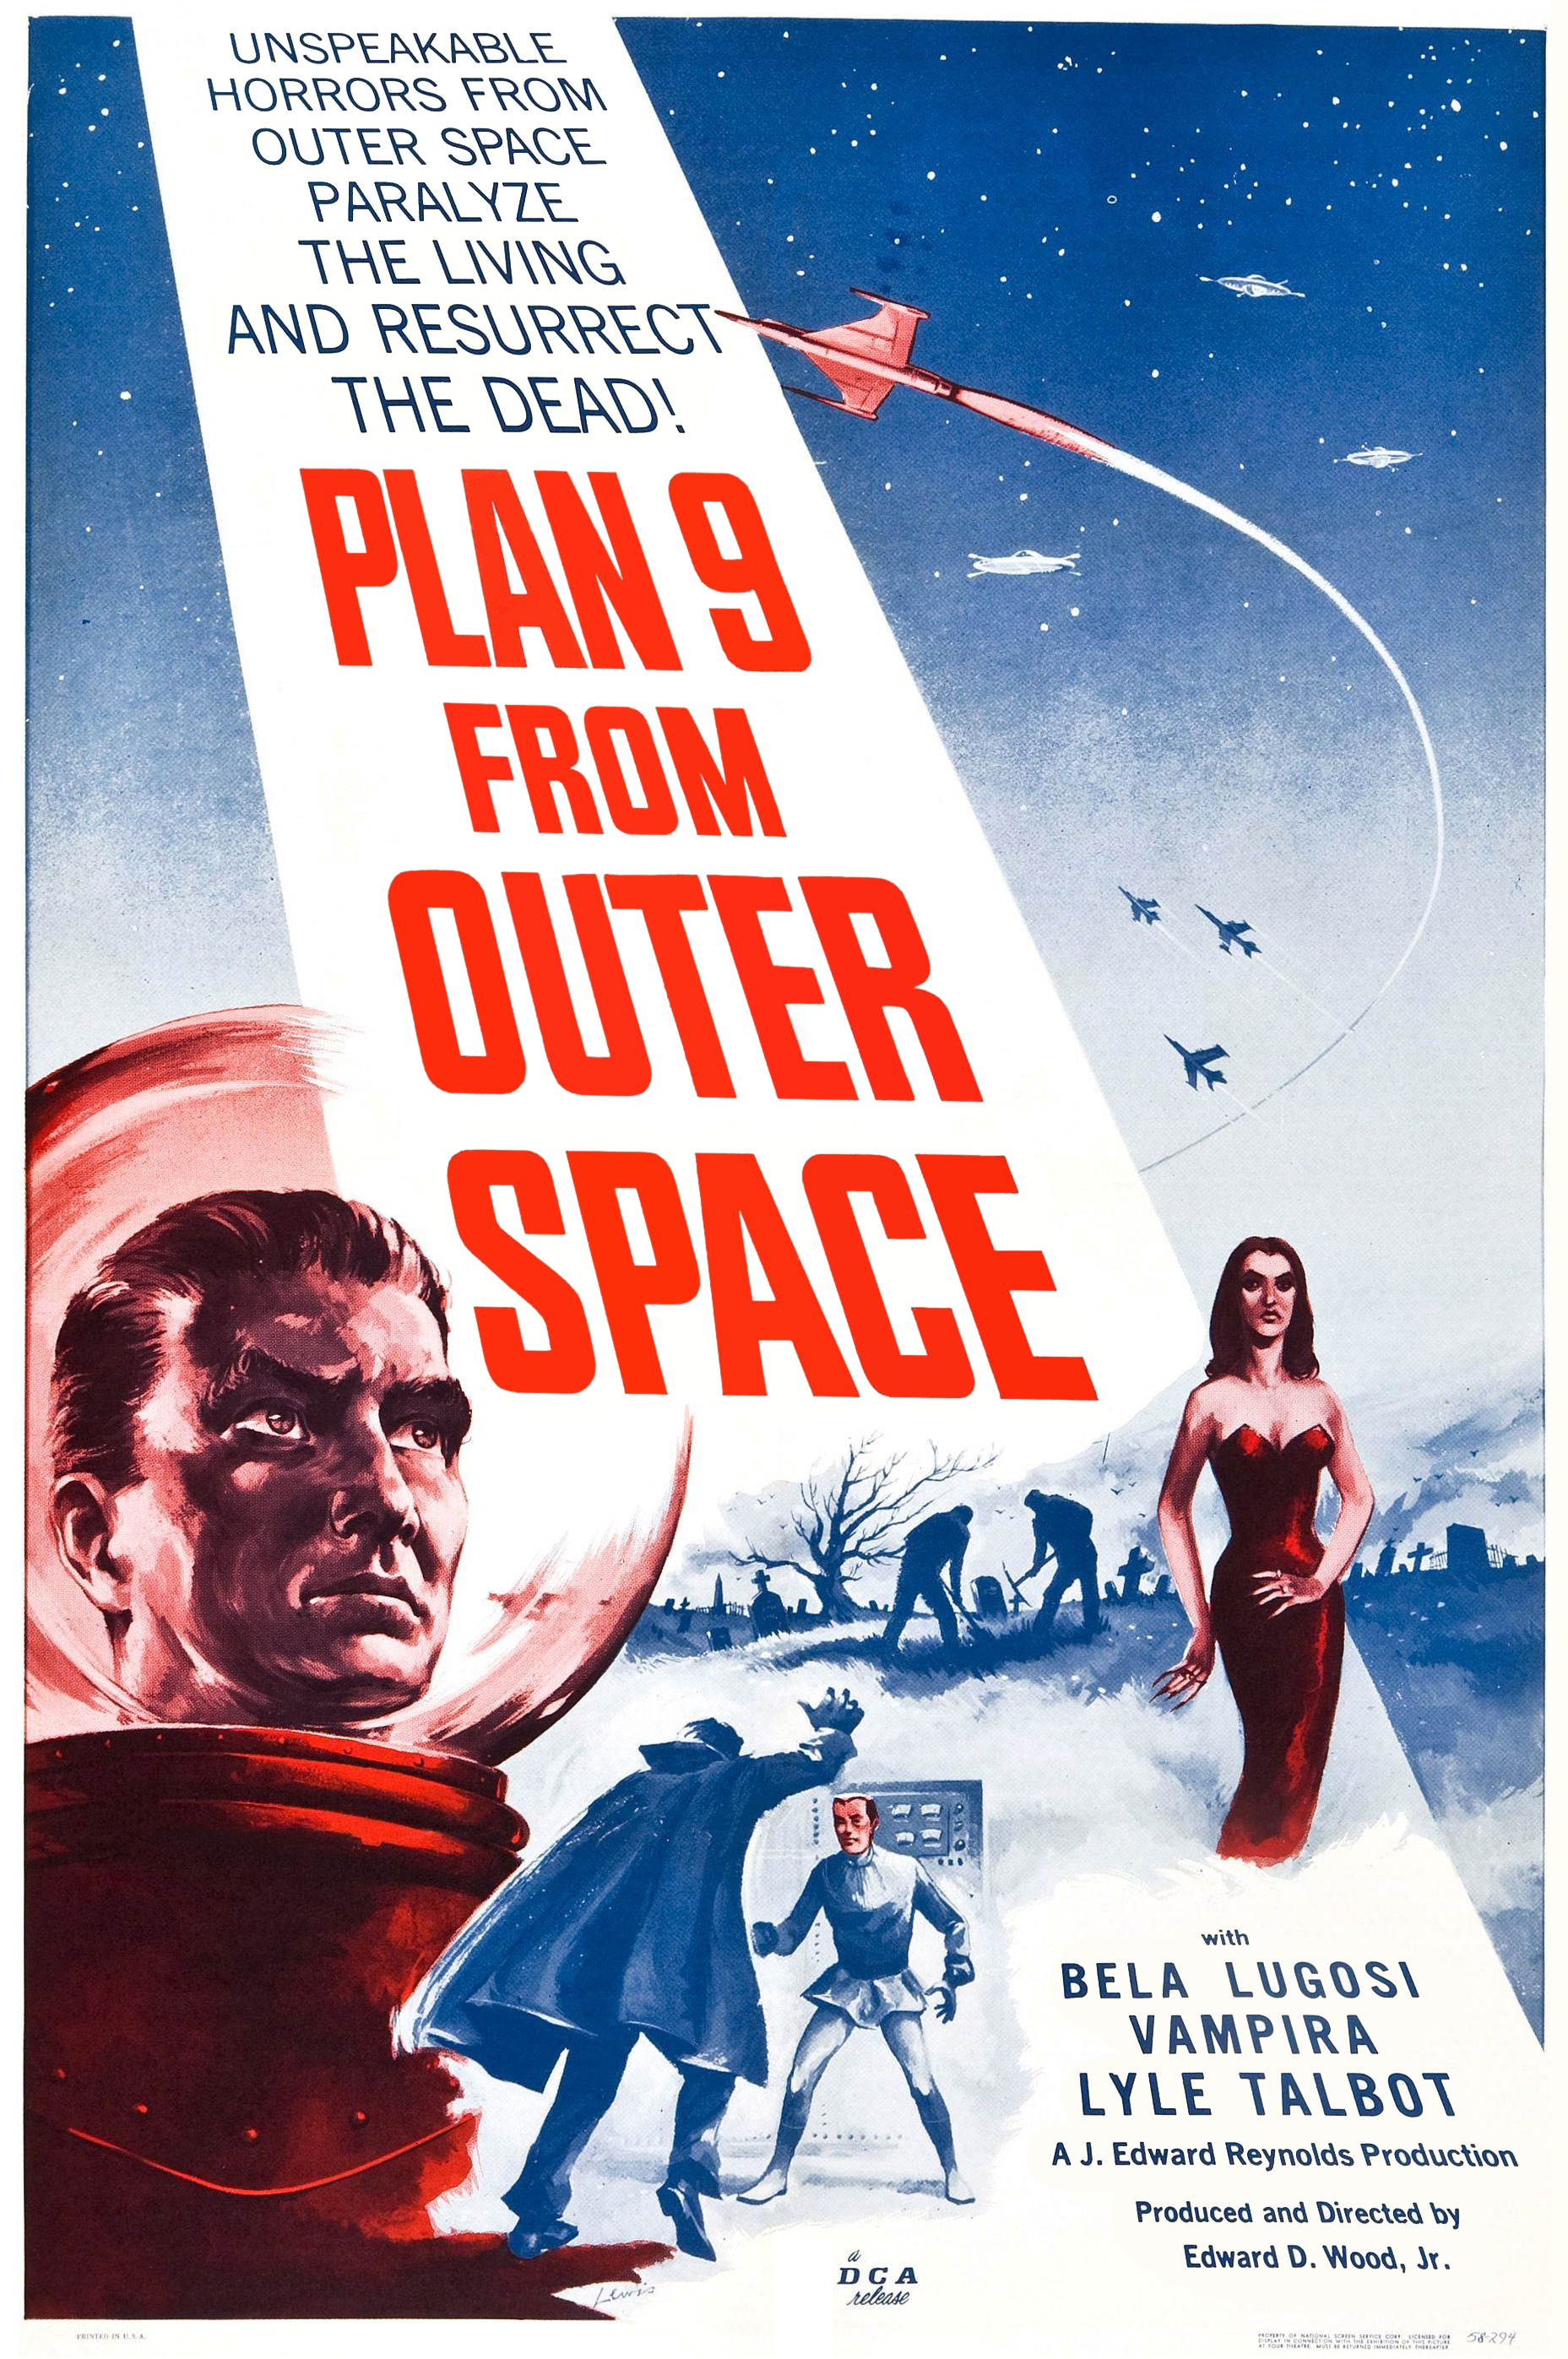 dee mena recommends vampire from outer space pic